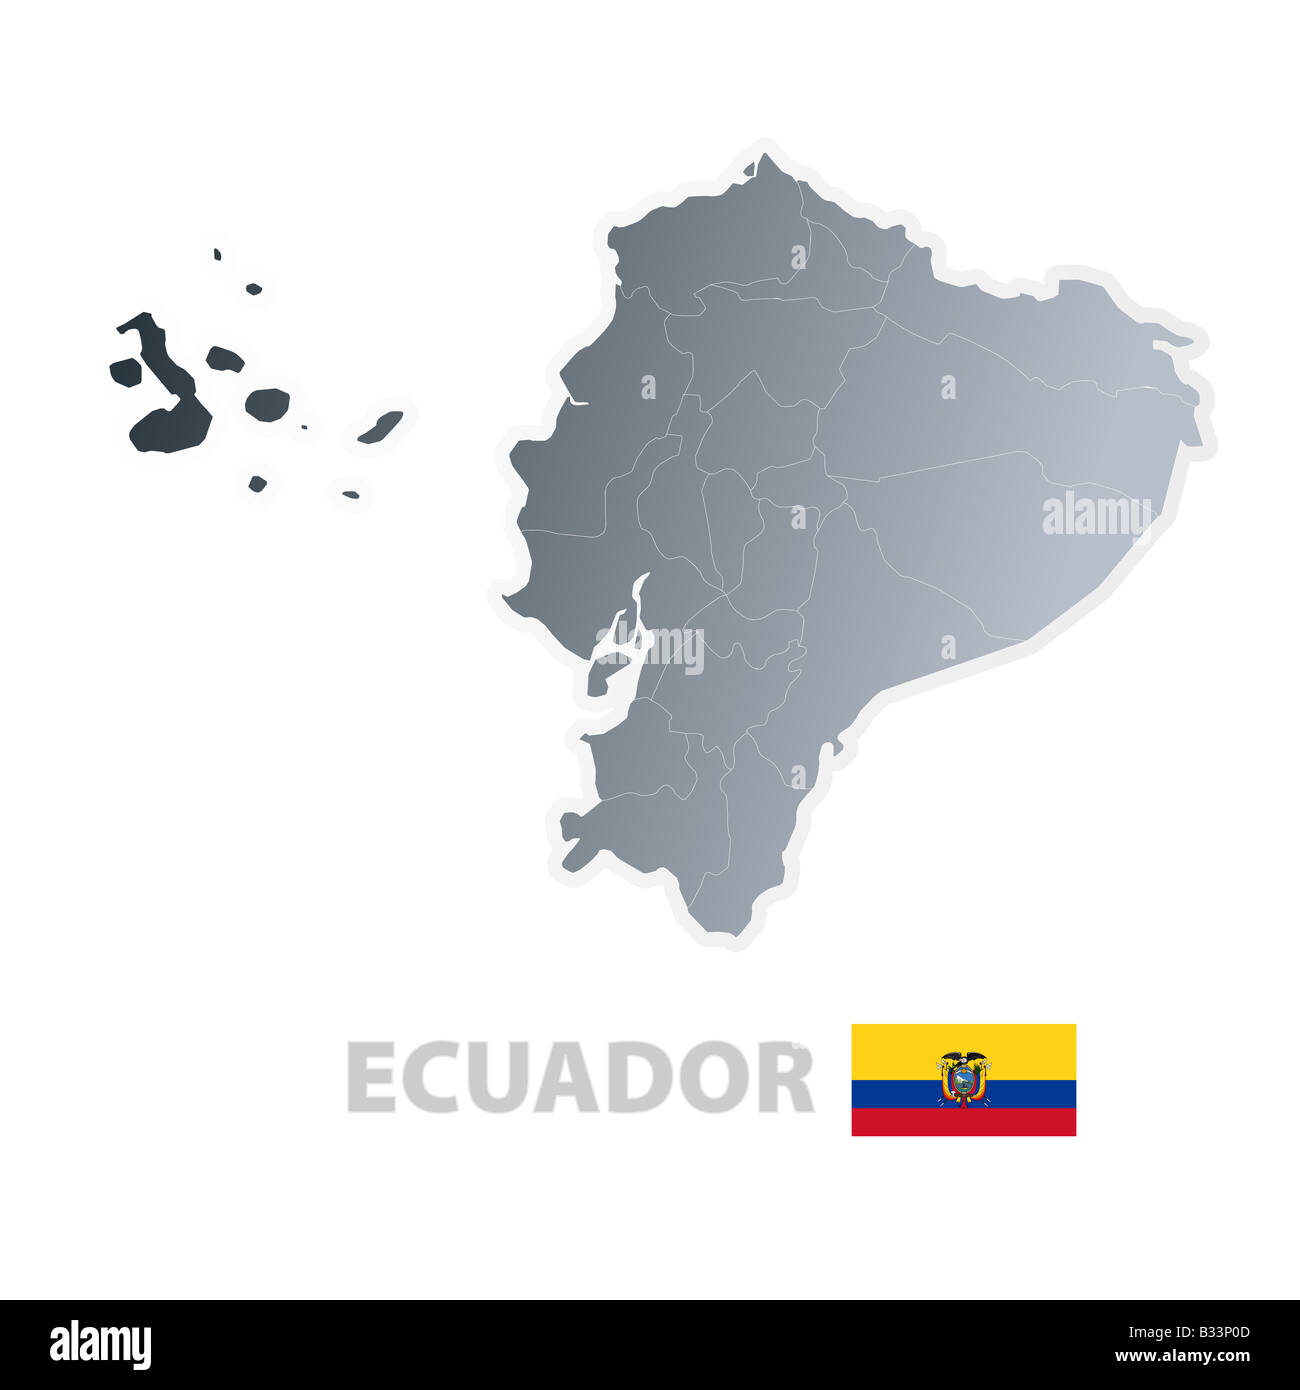 Vector illustration of the map with regions or states and the official flag of Ecuador Stock Photo